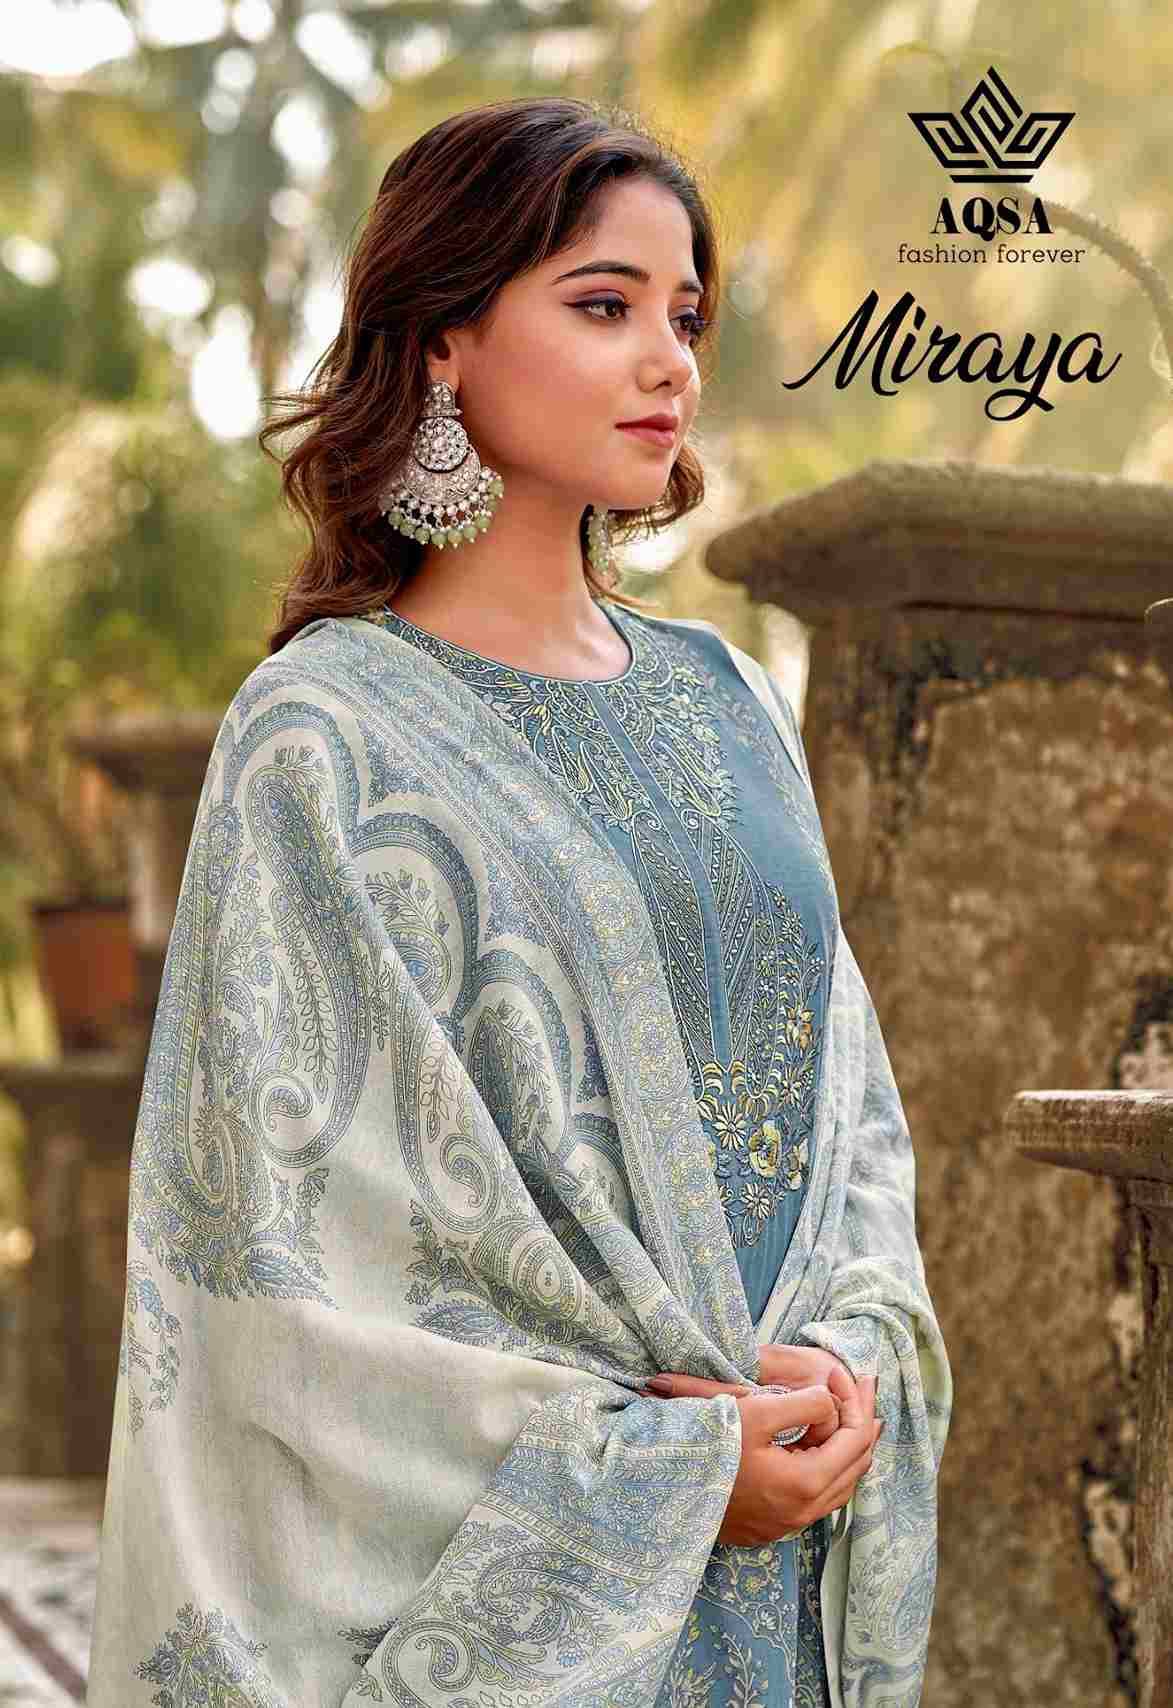 Miraya By Aqsa 1001 To 1006 Series Beautiful Stylish Festive Suits Fancy Colorful Casual Wear & Ethnic Wear & Ready To Wear Pure Cambric Cotton Print Dresses At Wholesale Price